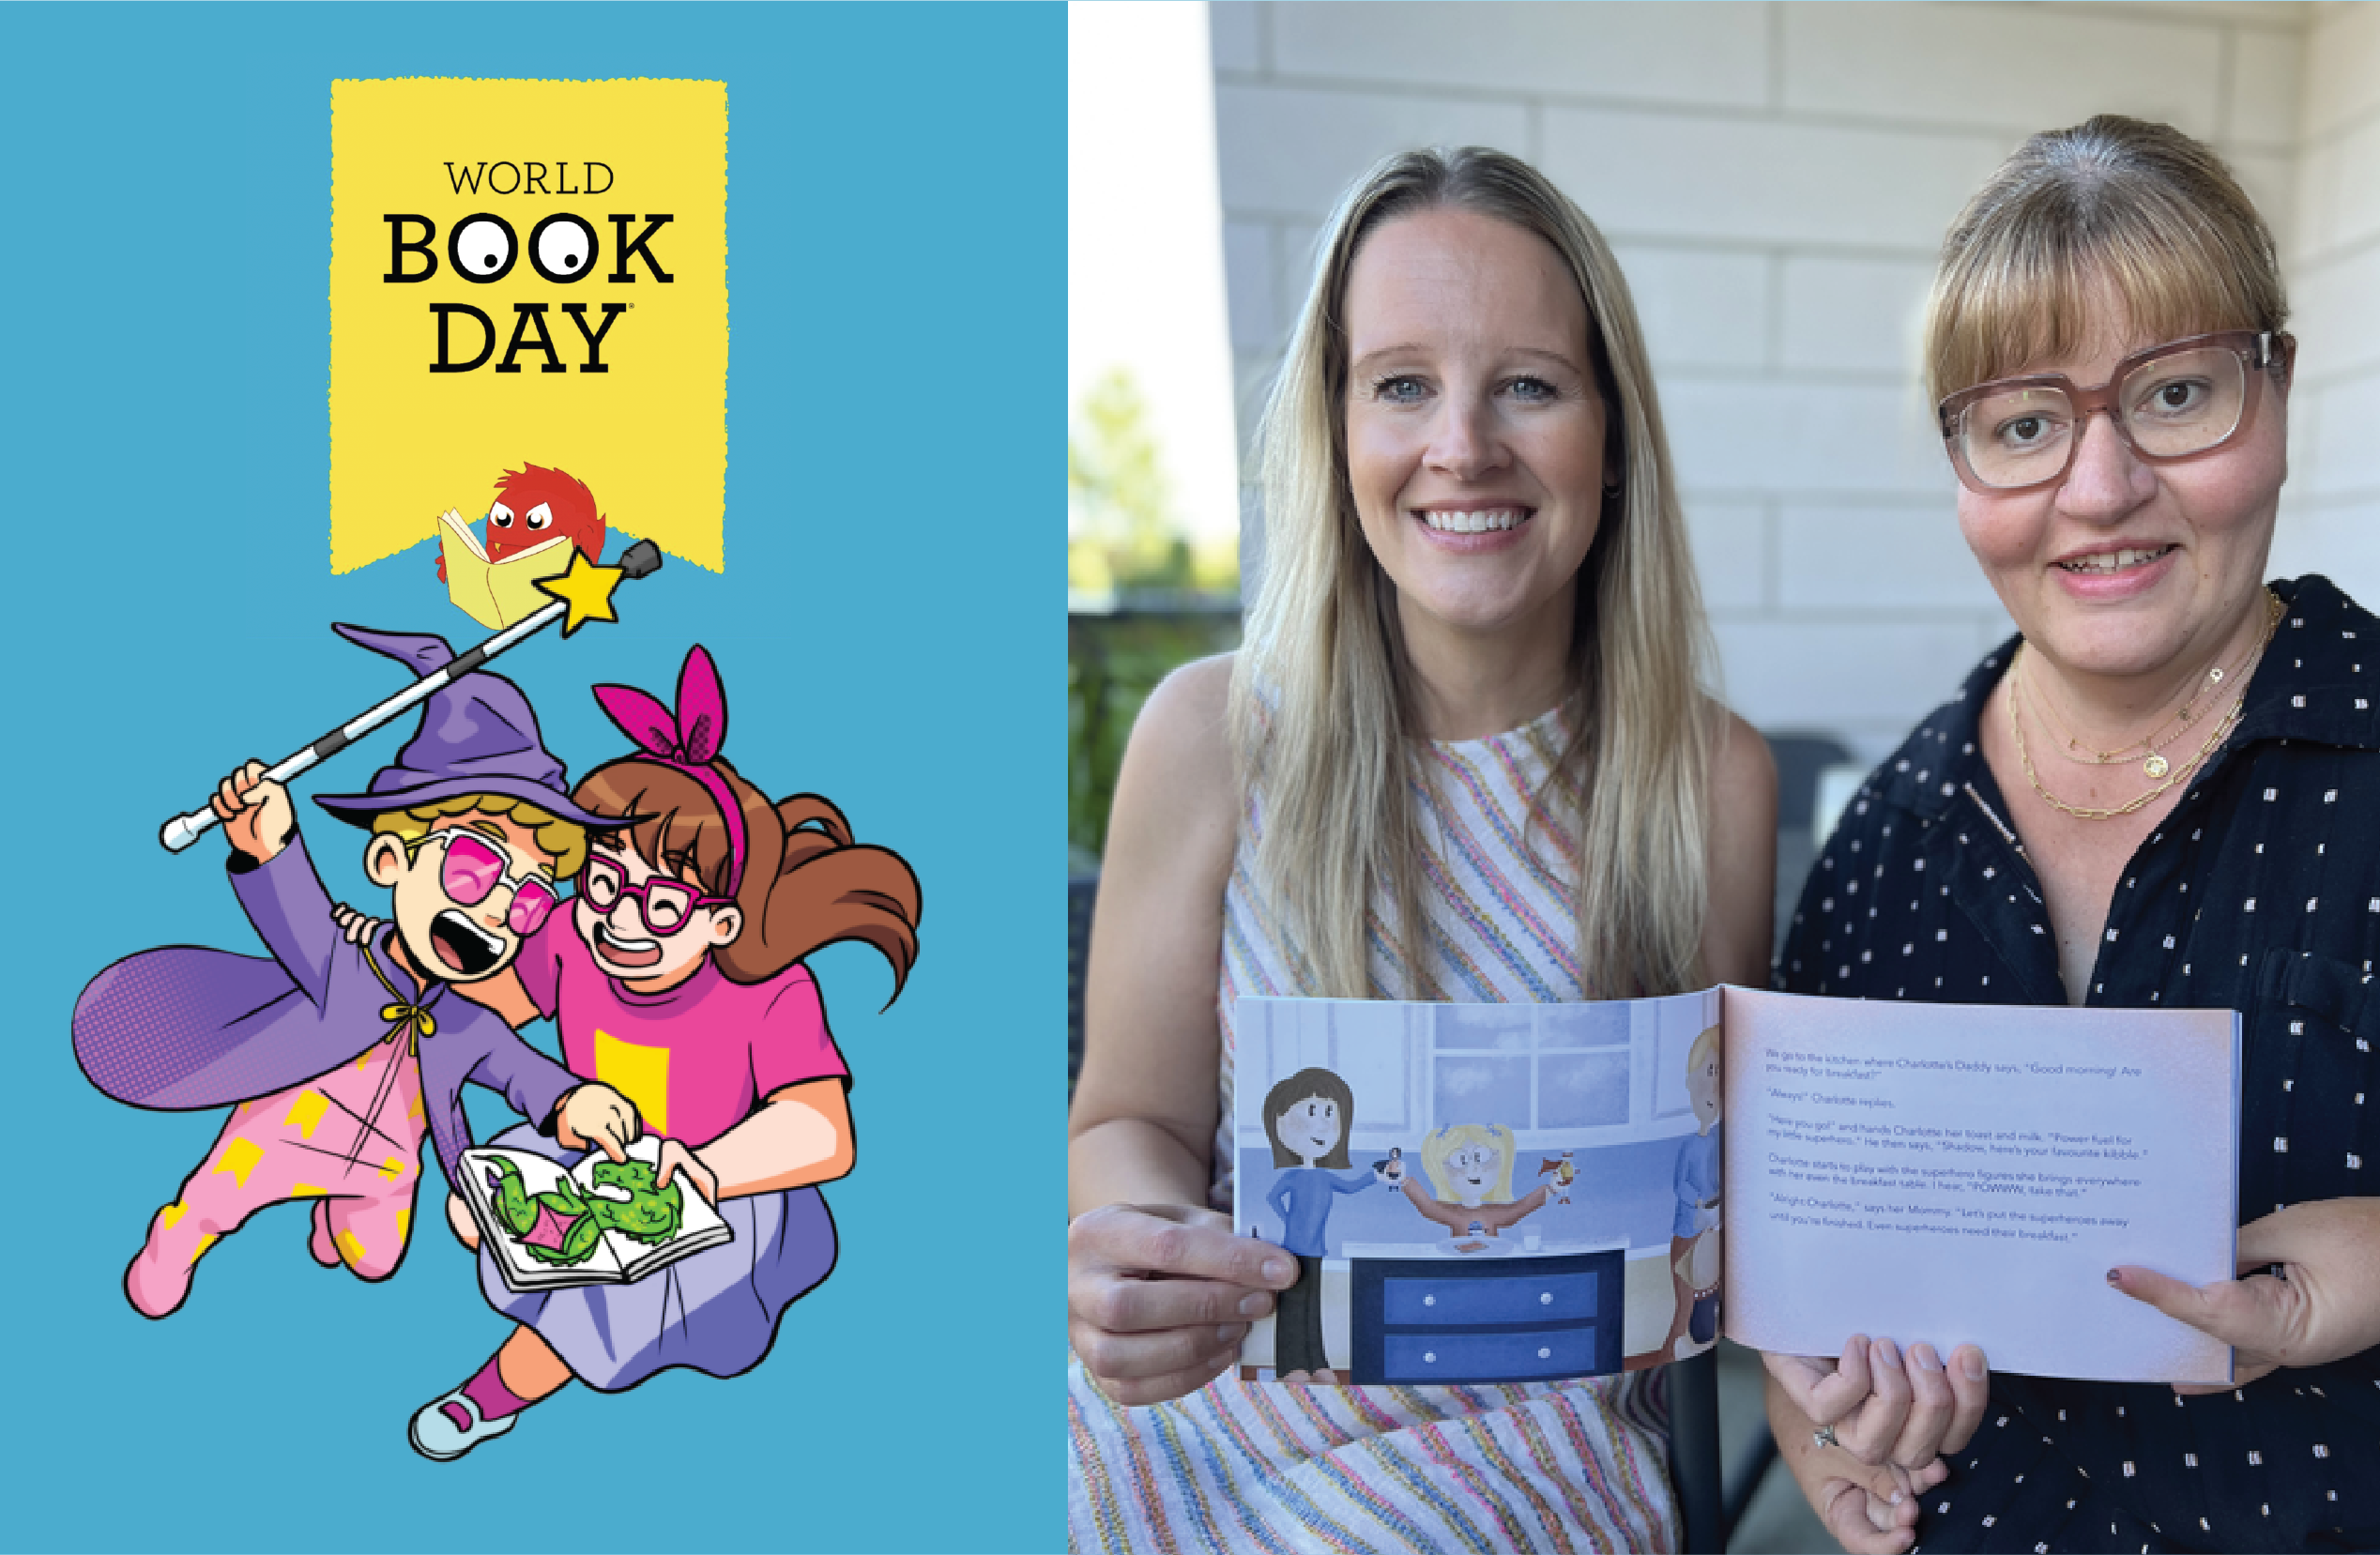 Two woman holding their book open and comic-like graphic for World Book Day